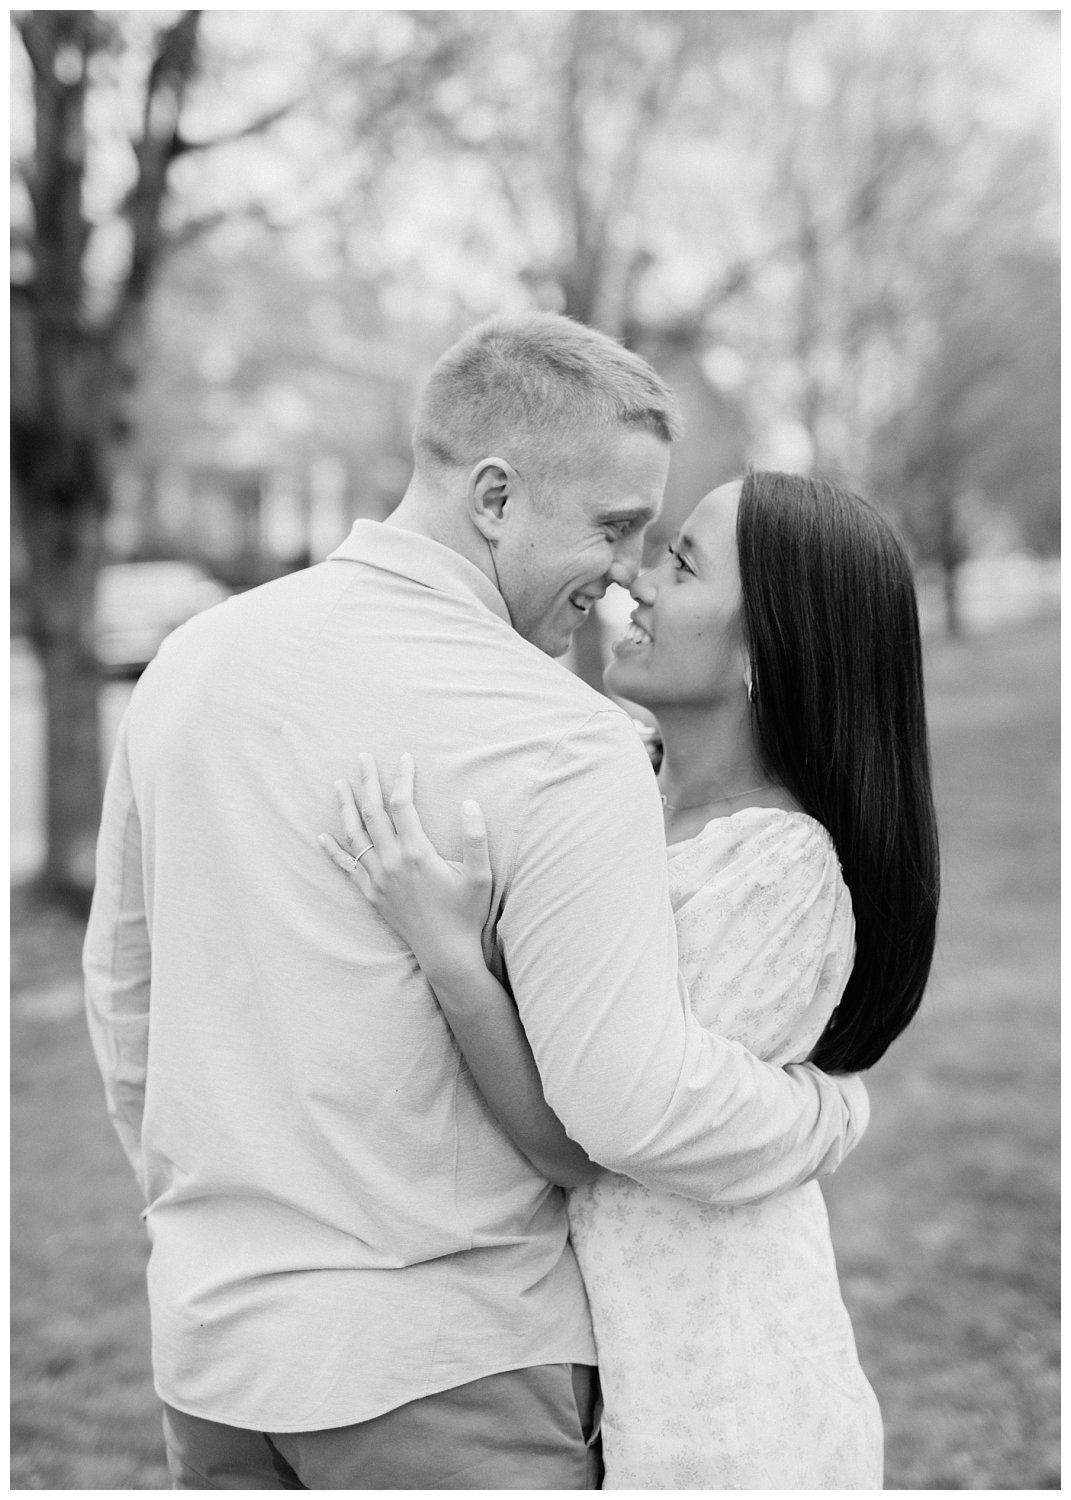 Engaged couple portraits at Monument Avenue in Richmond Virginia photographed by Heather Dodge Photography